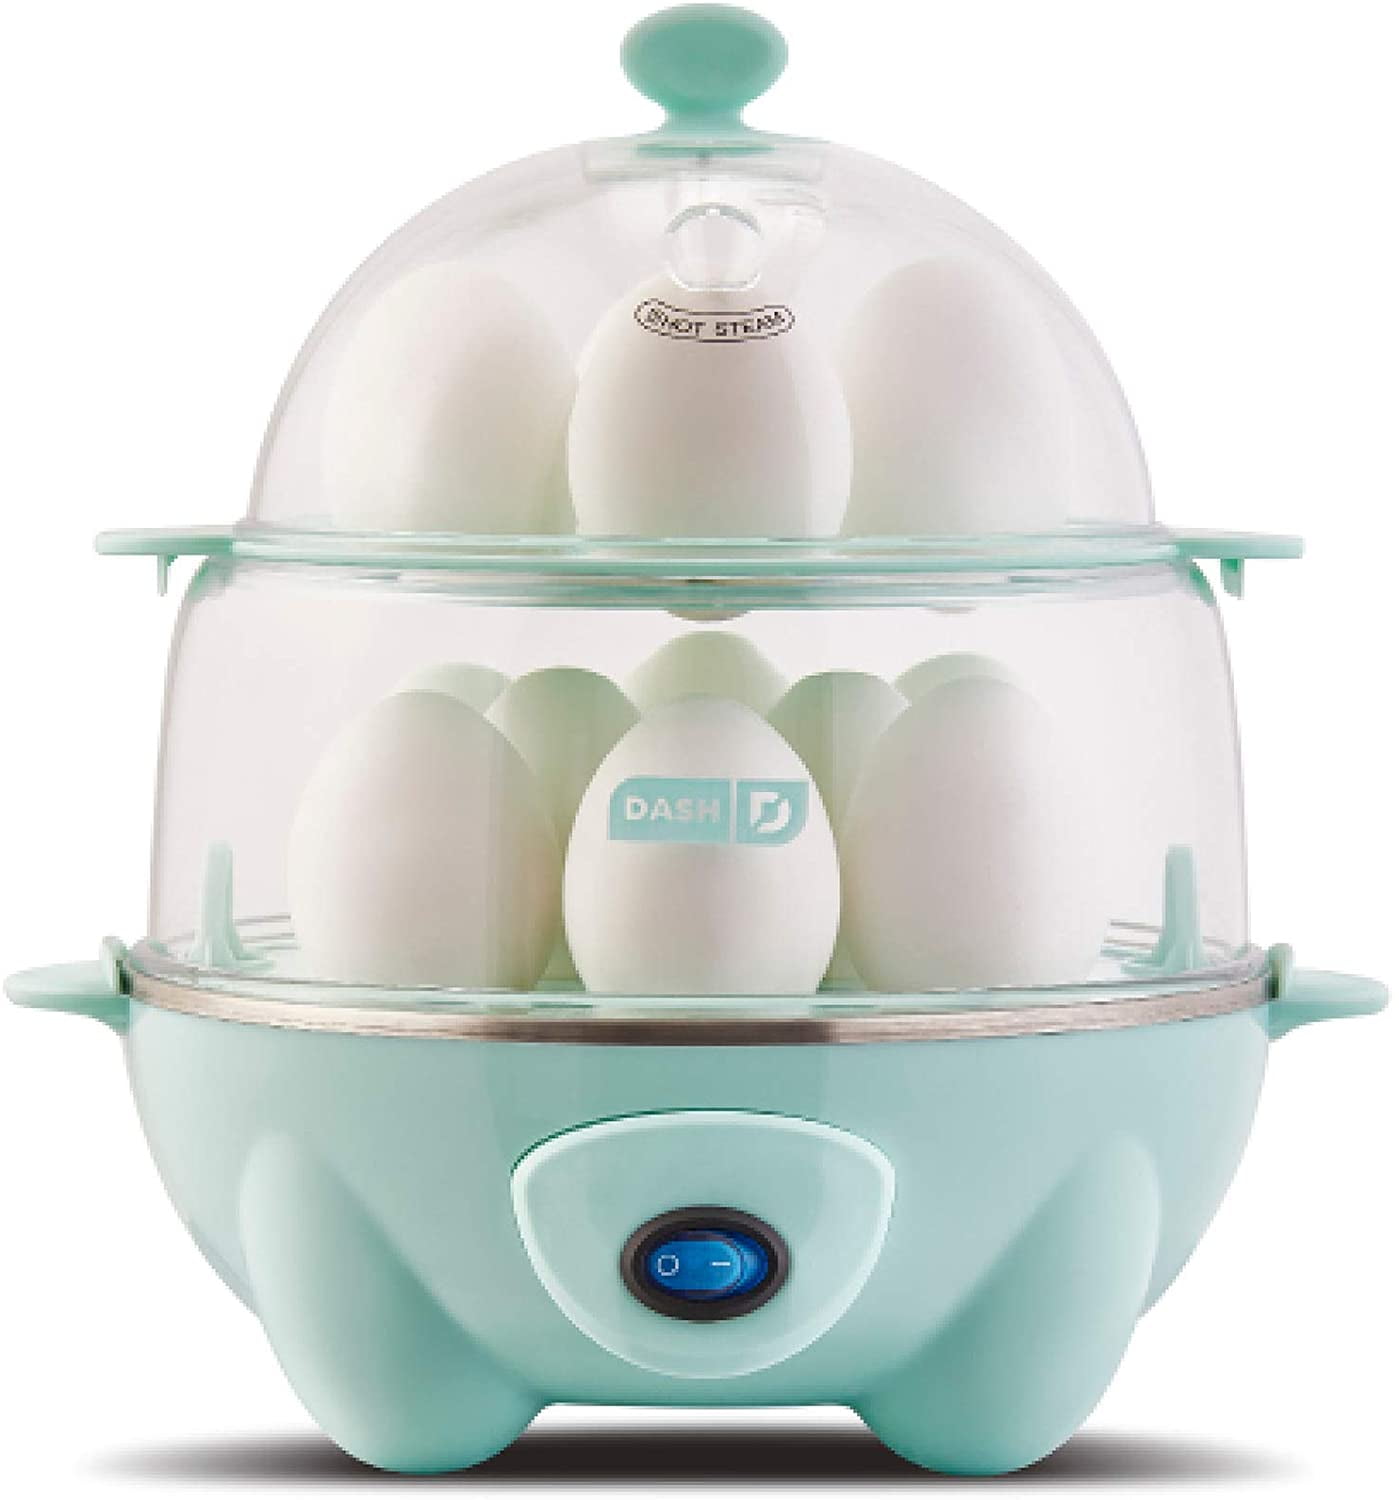 DASH Deluxe Rapid Electric 12 Egg Cooker - Red - Free Shipping